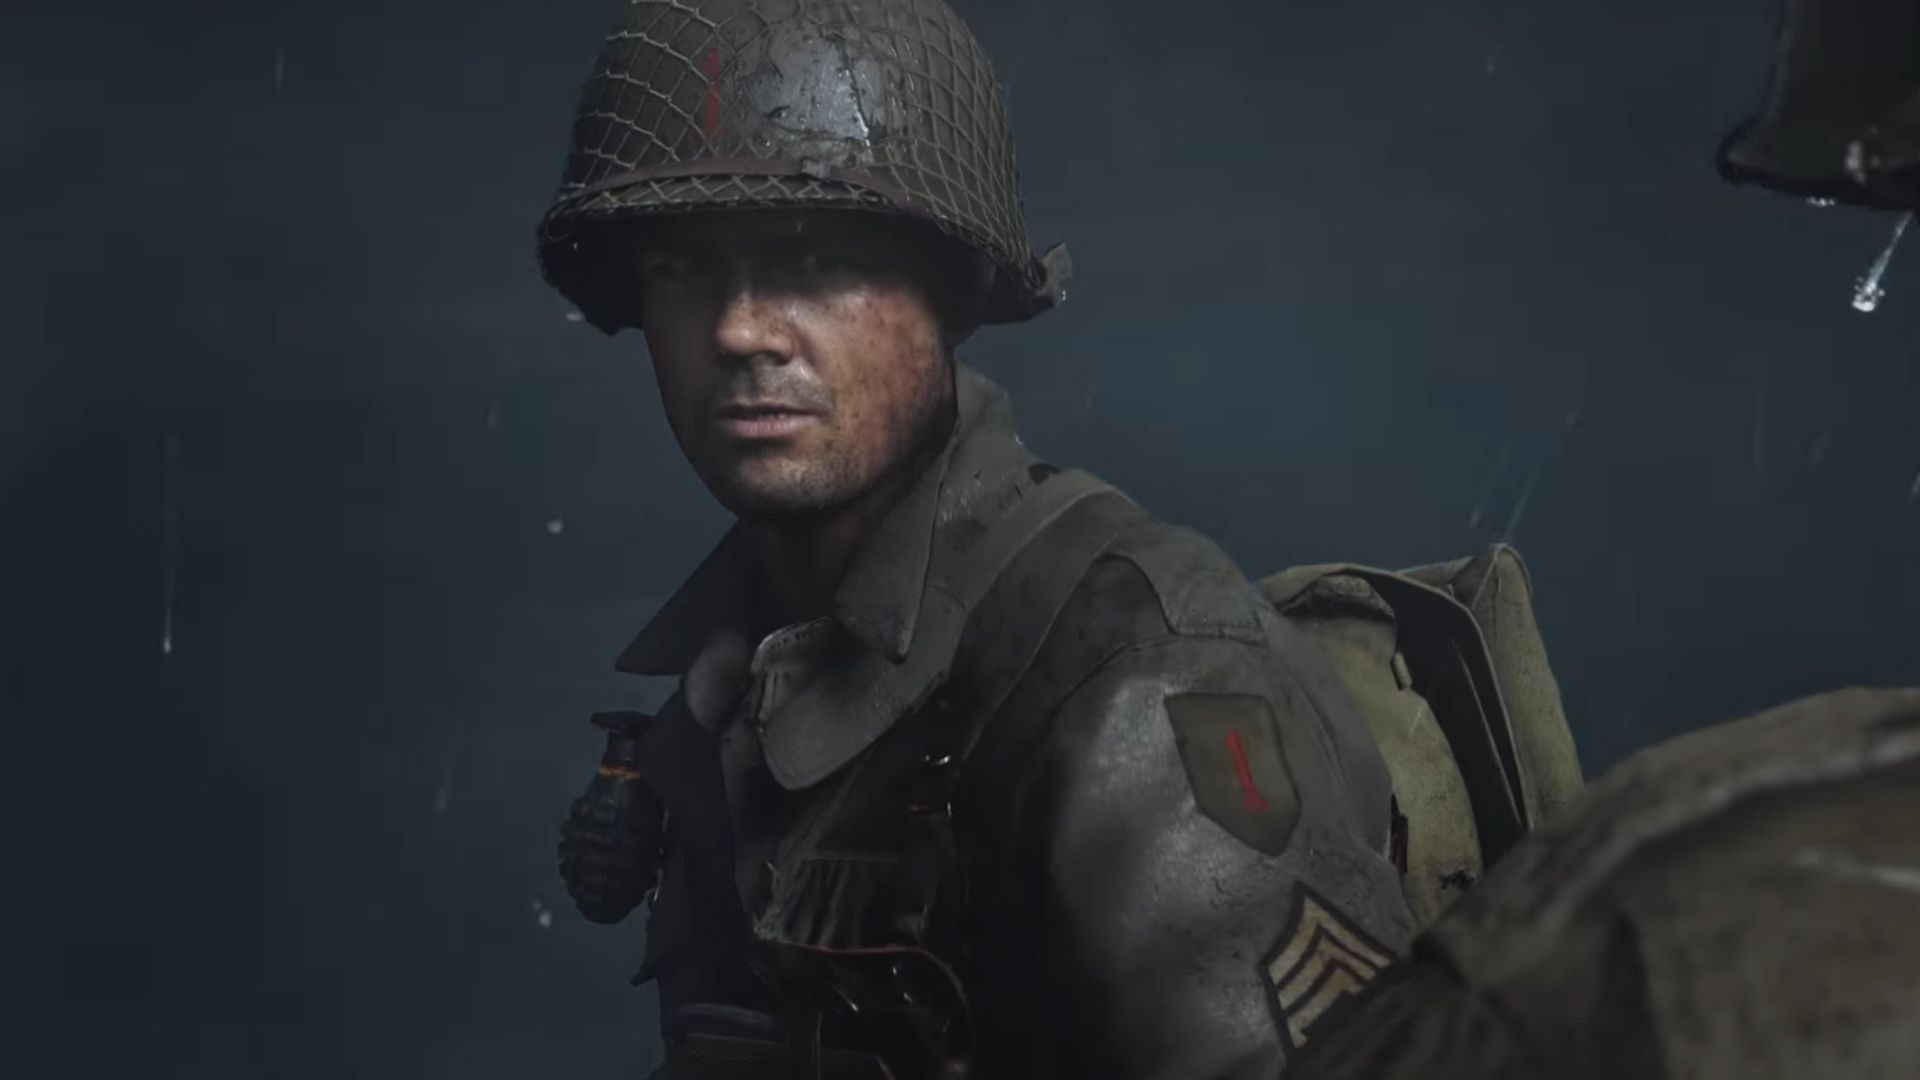 Call Of Duty WWII: The release date is 3 November